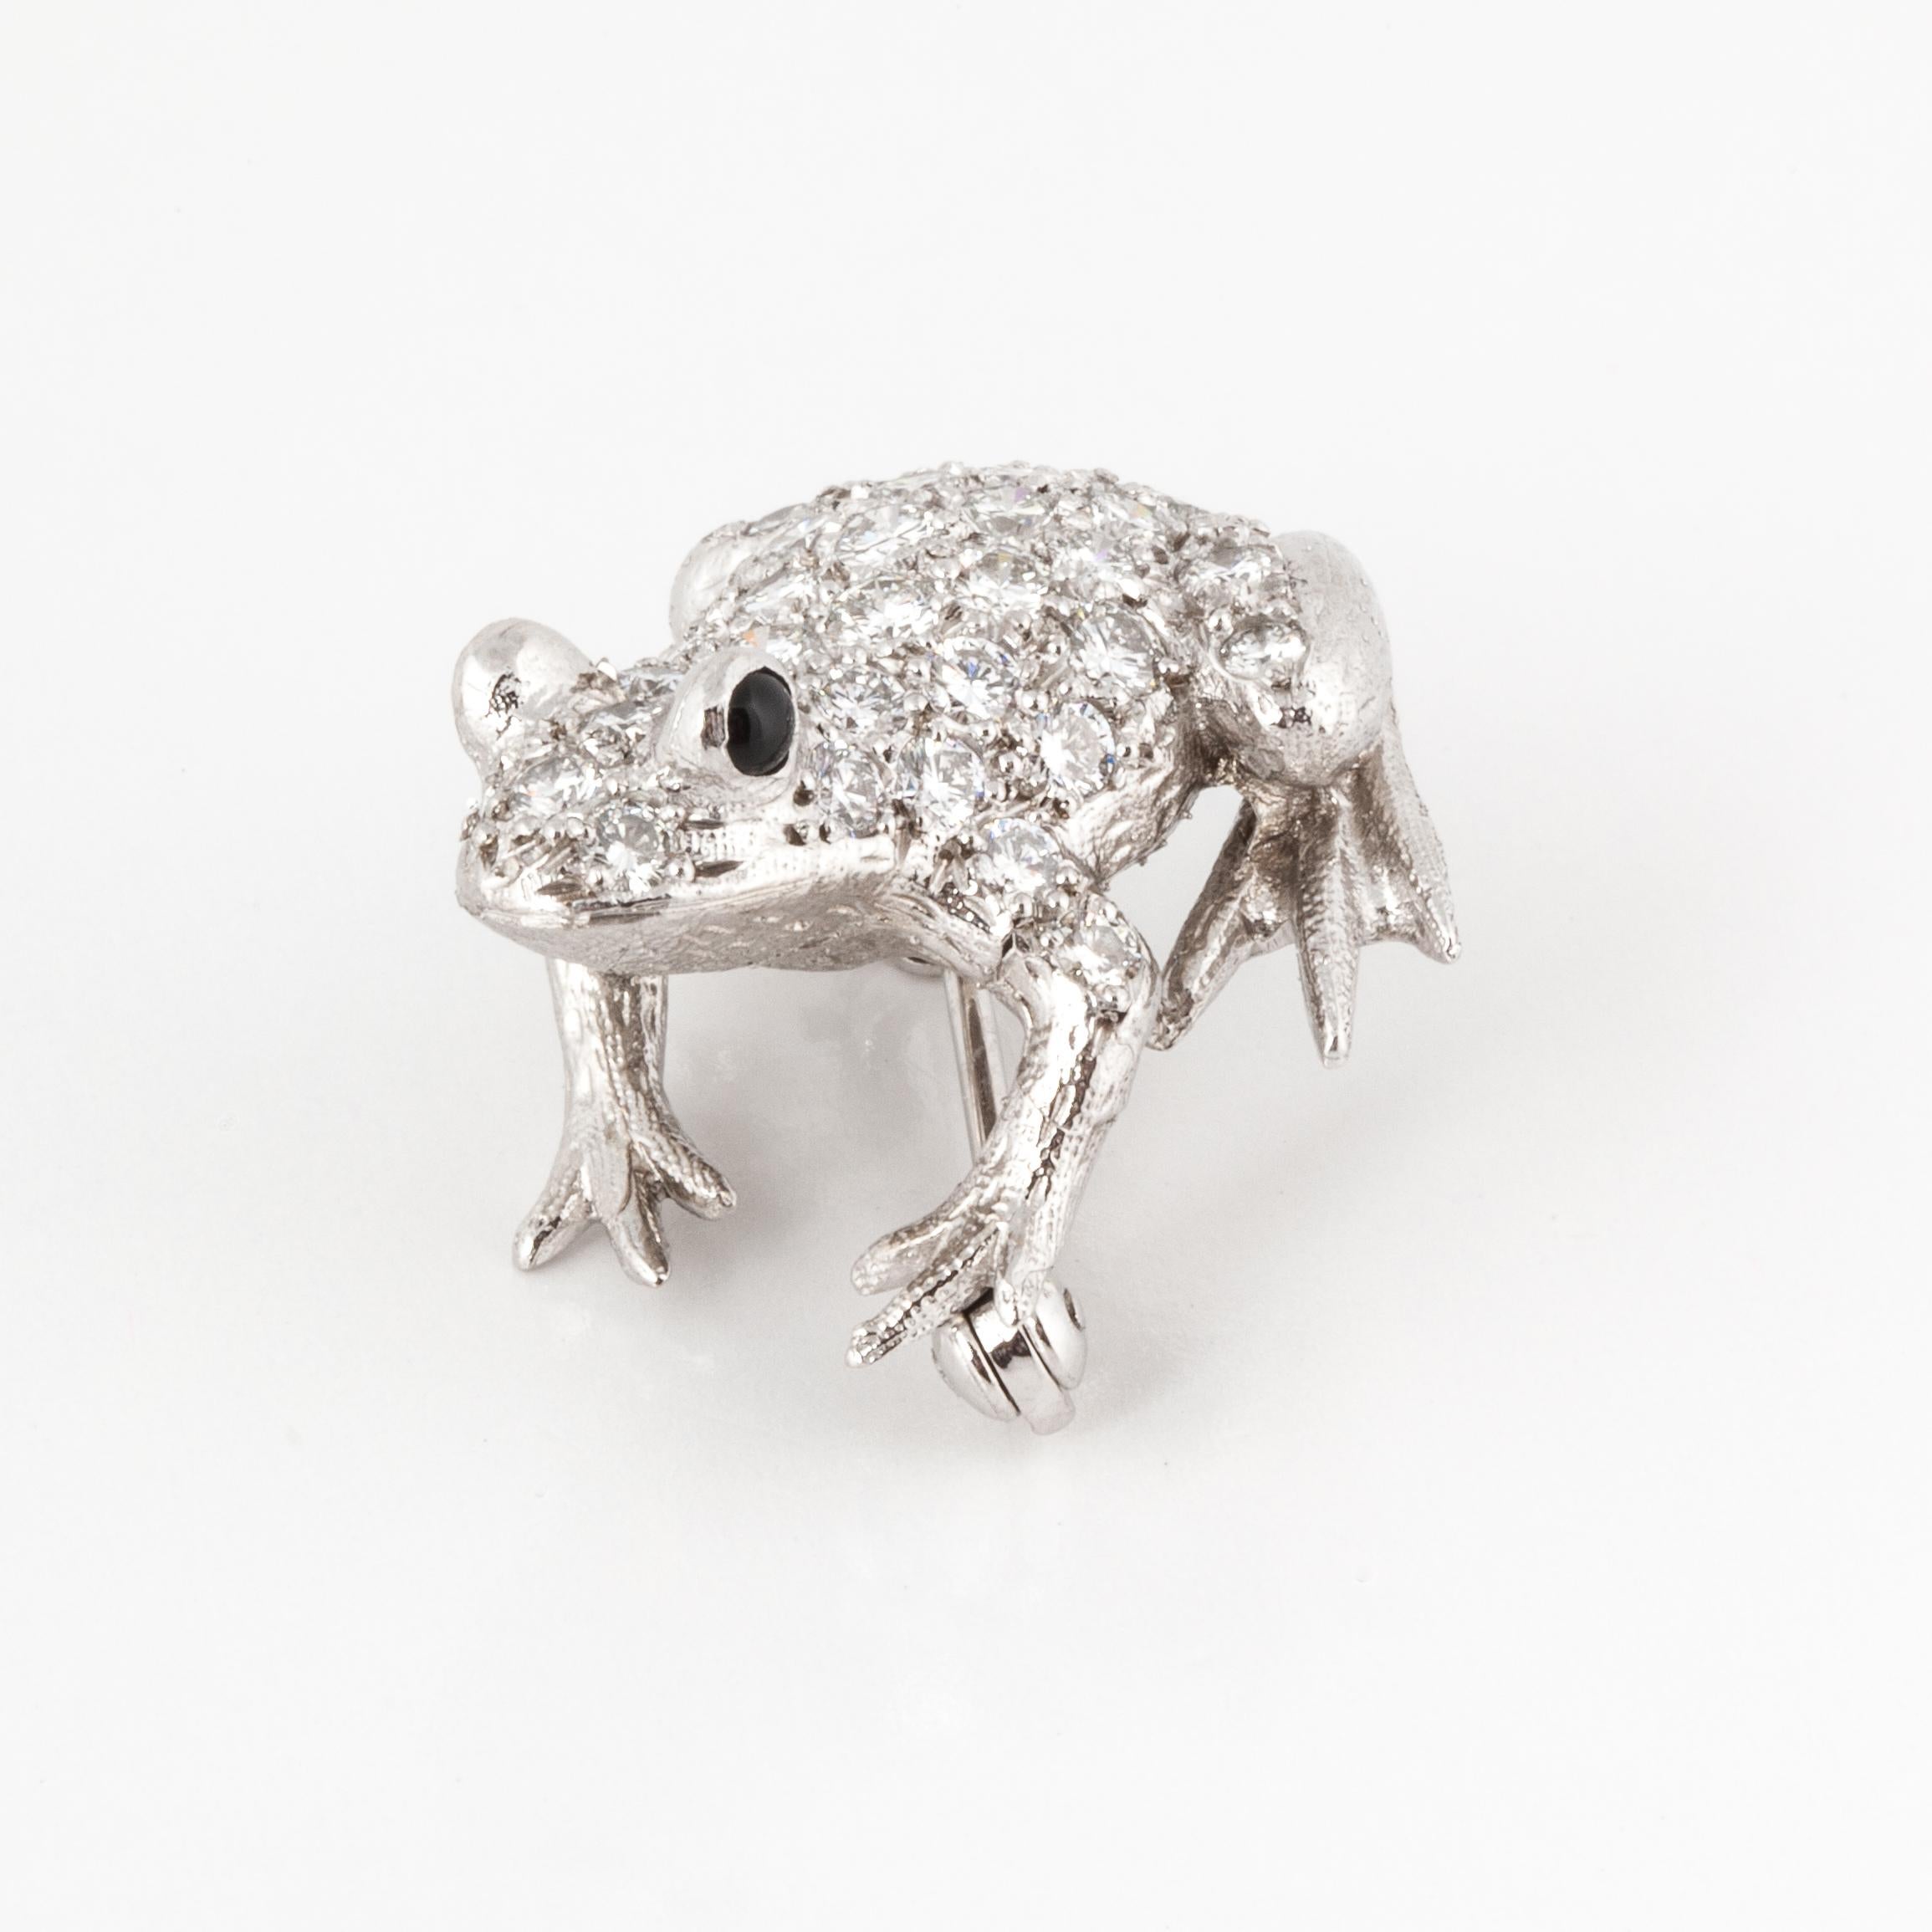 18K white gold frog pin by E. Wolfe & Co. that features 43 round diamonds totaling 1.95 carats; E-F color and VVS2-VS2 clarity.  The eyes are cabochon black onyx.  Measures 1 inch by 15/16 inches and is 1/2 inch deep.